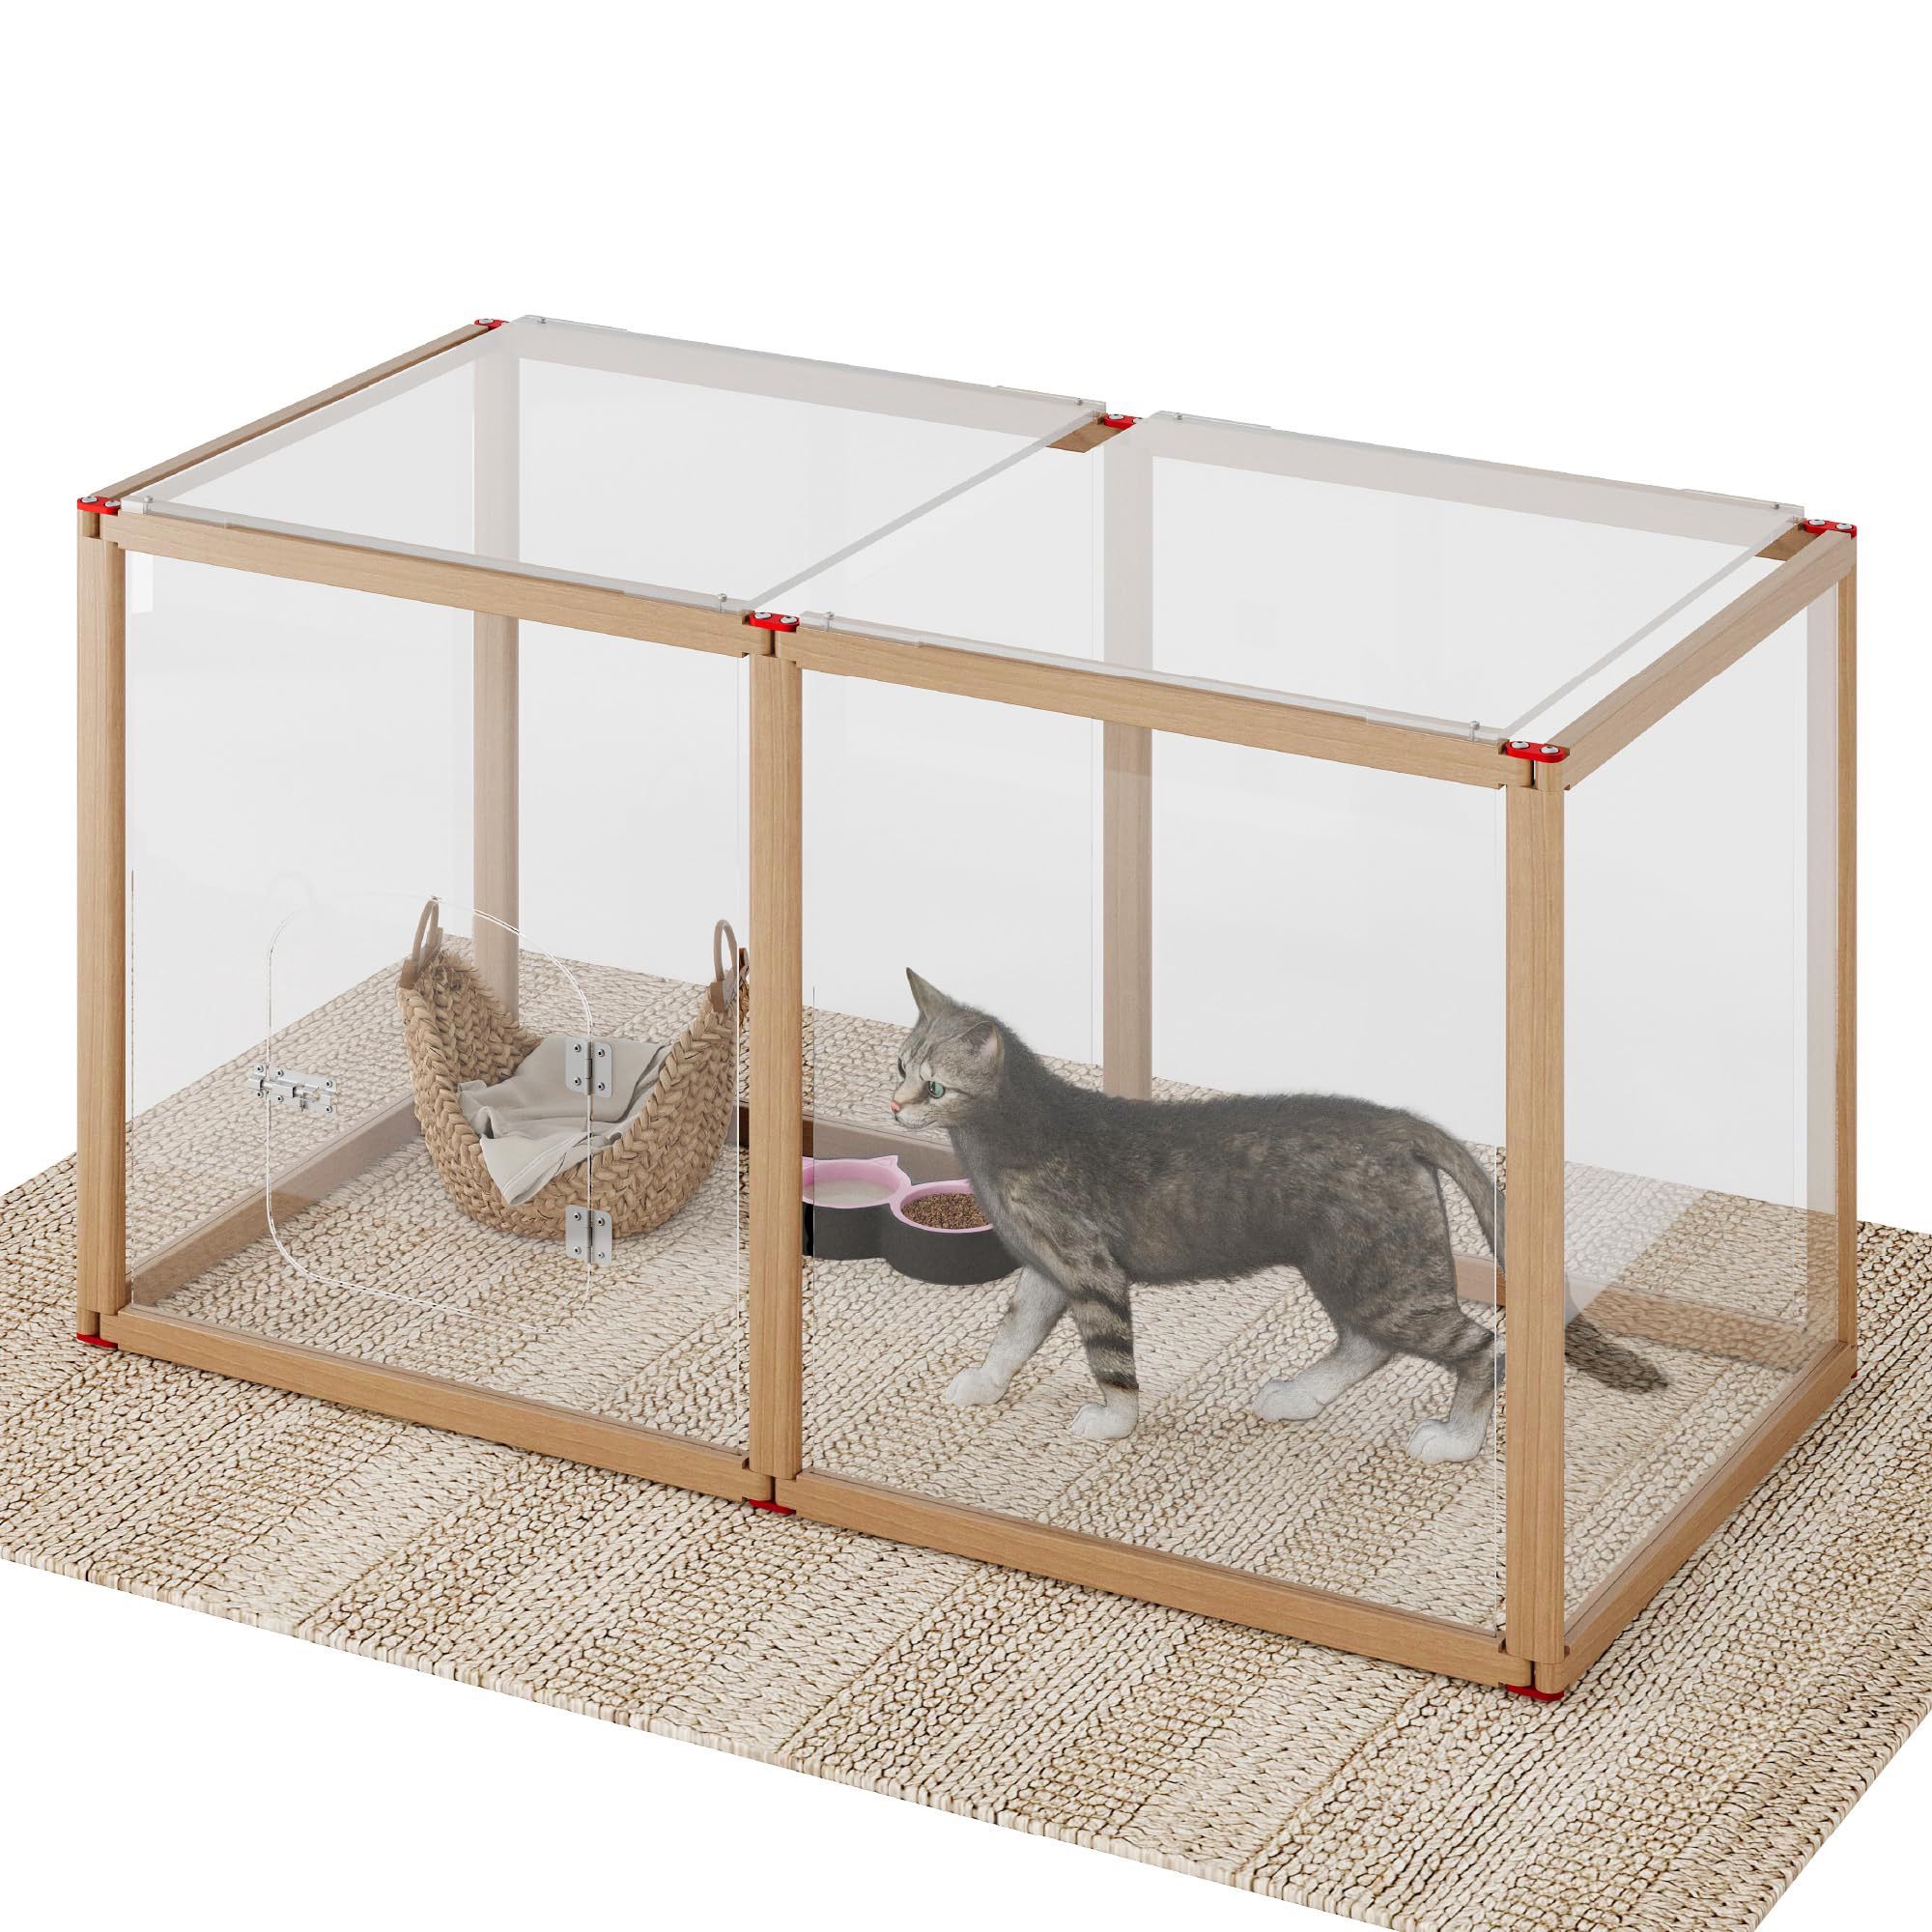 Pet Playpen, Dog Playpen Fence with Acrylic Panels & Wooden Rods, Clear Puppy Pen with Transparent Panels for Small Animals, Indoor Pets Fence Puppies